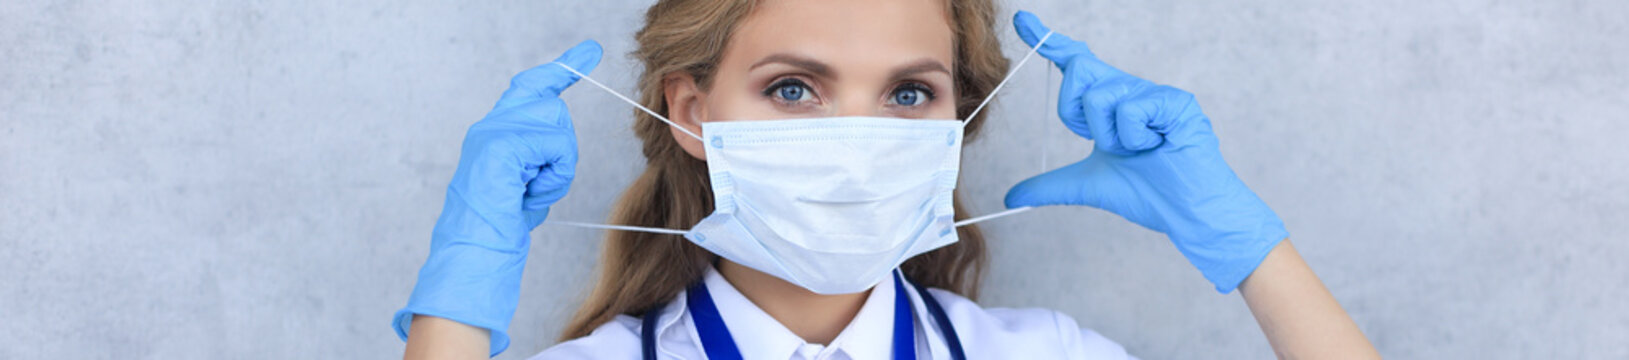 Medical staff preventive gear against coronavirus. Portrait of female doctor with stethoscope in mask.